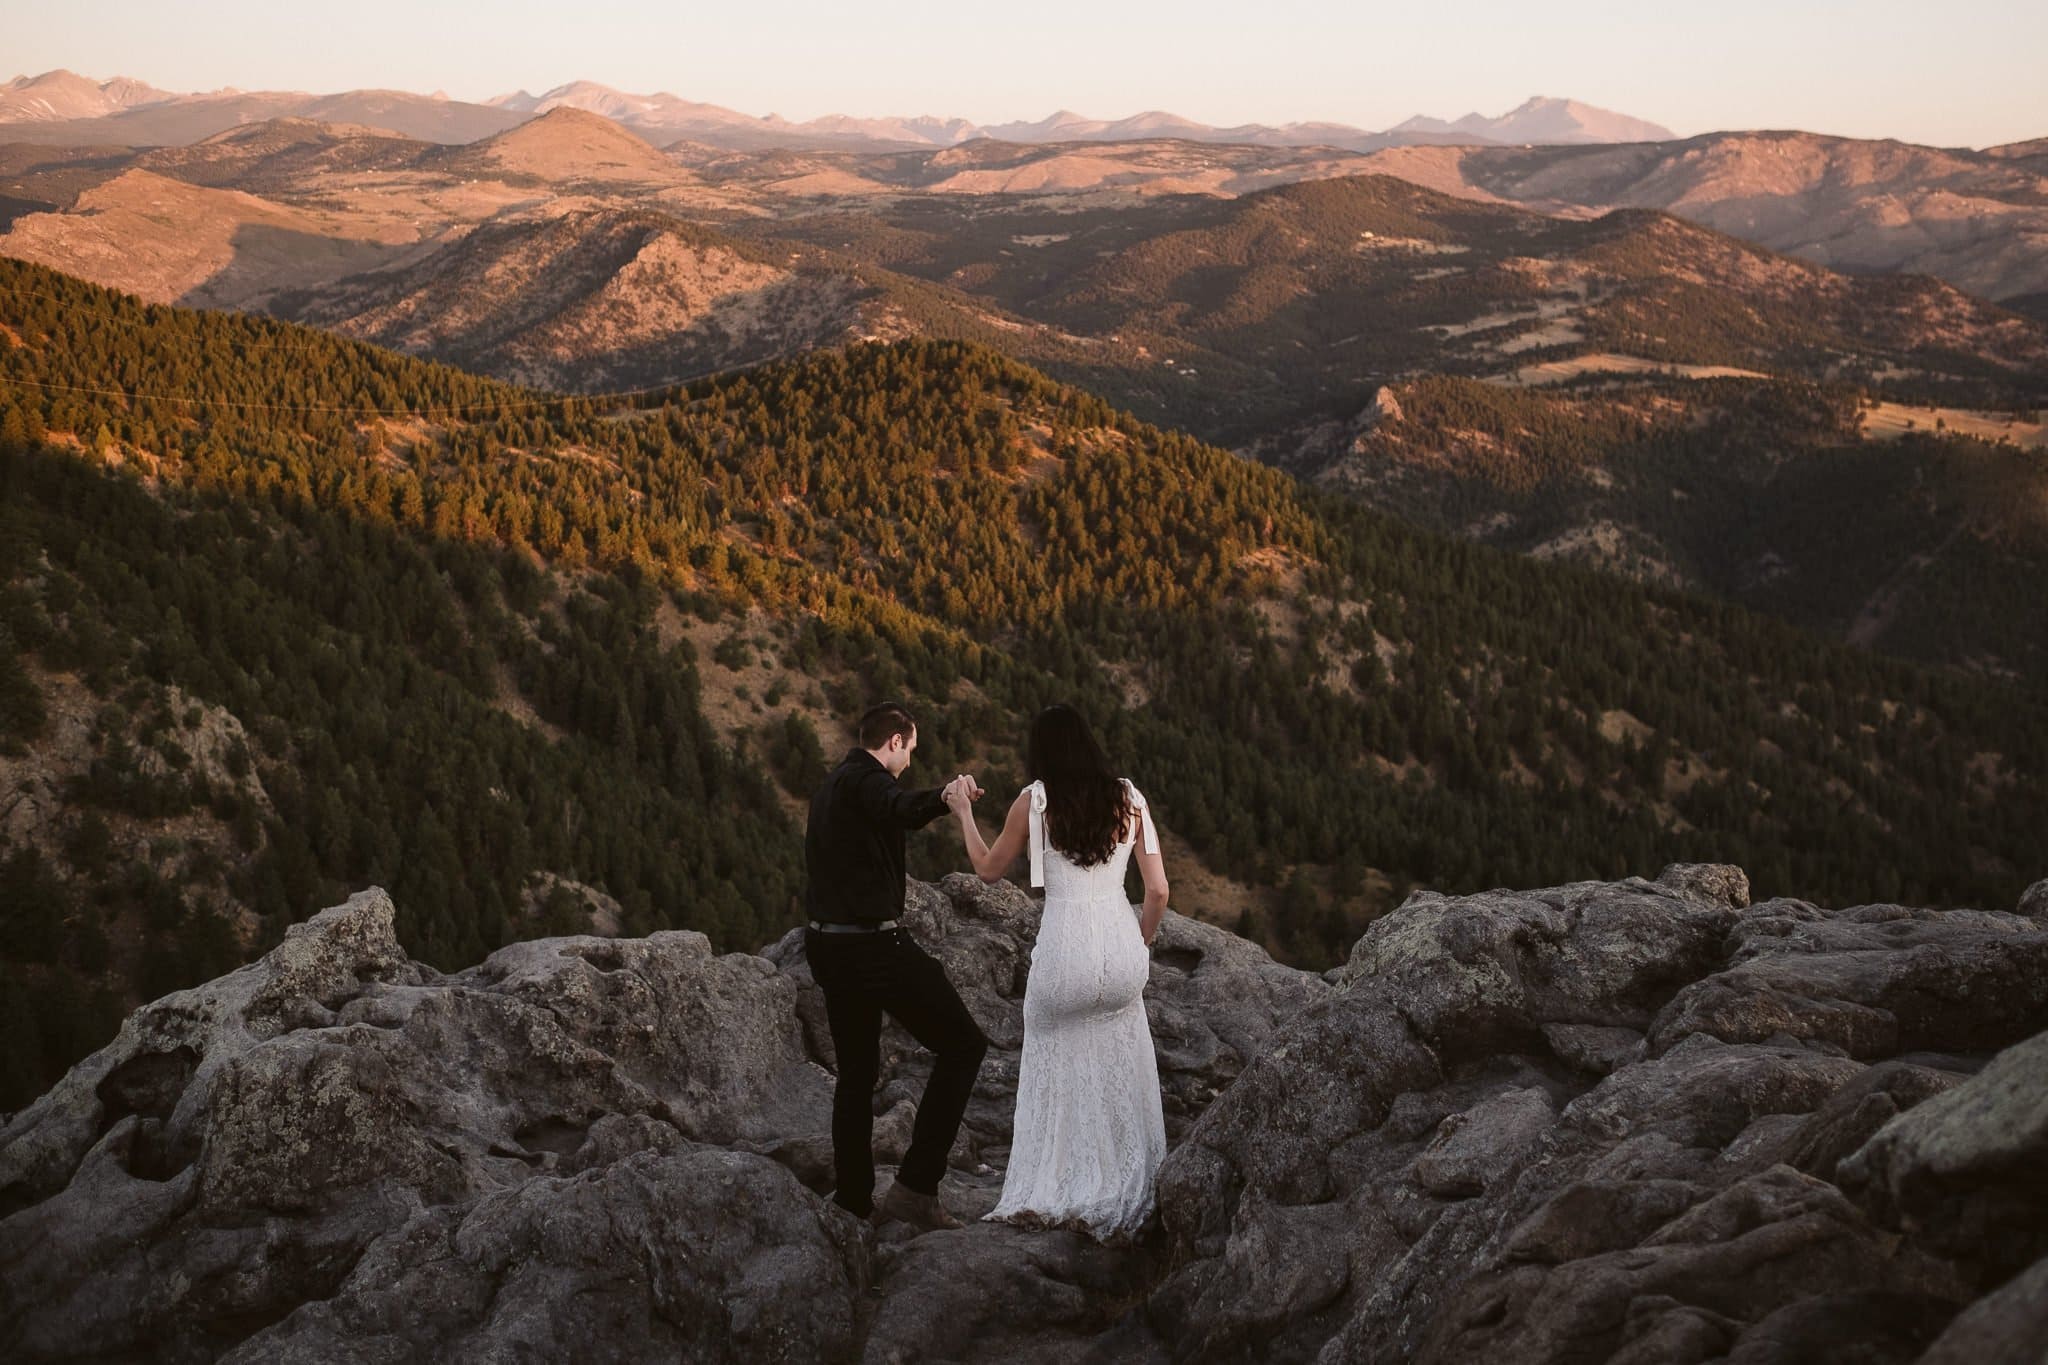 Colorado Elopement Guide: Best Places to Elope, Checklist, and Planning